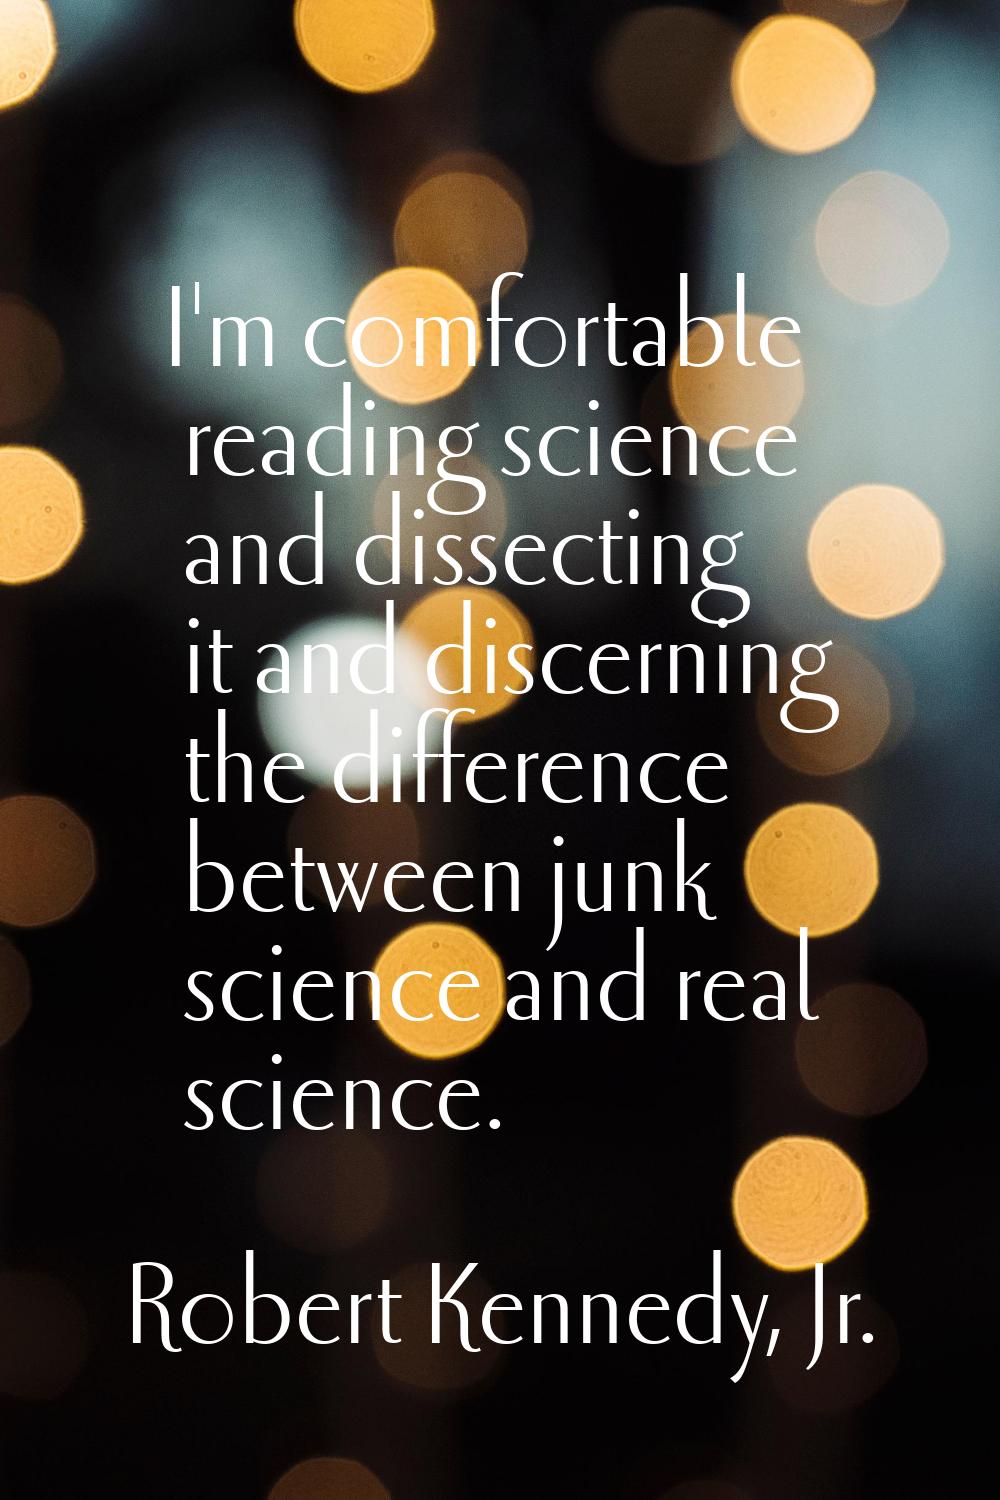 I'm comfortable reading science and dissecting it and discerning the difference between junk scienc